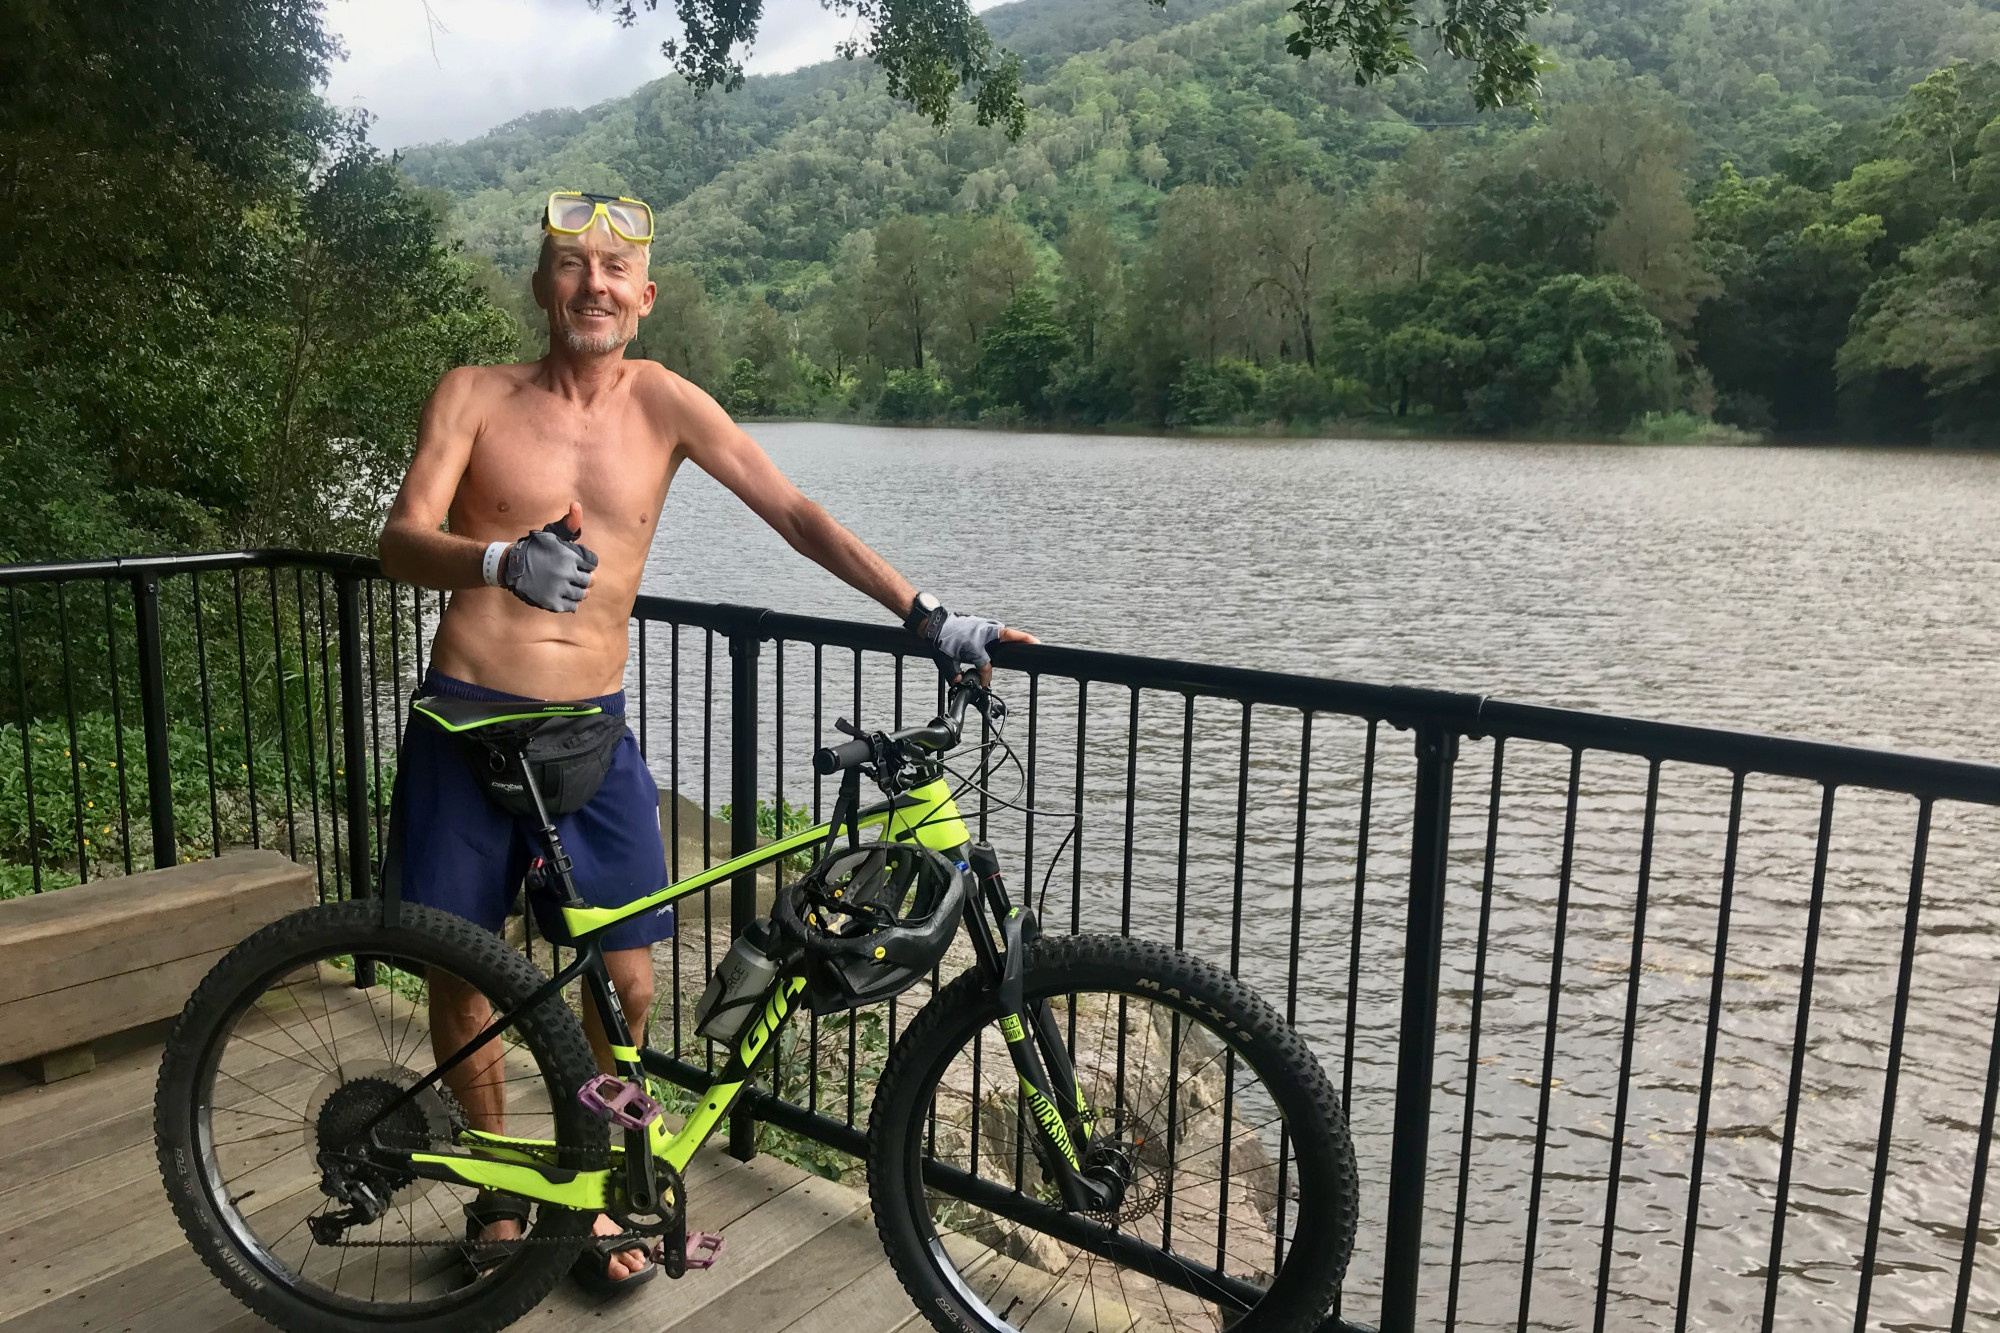 Croc attack survivor Mark Ridge at Lake Placid on Friday, the day after the attack. Picture: Tanya Murphy